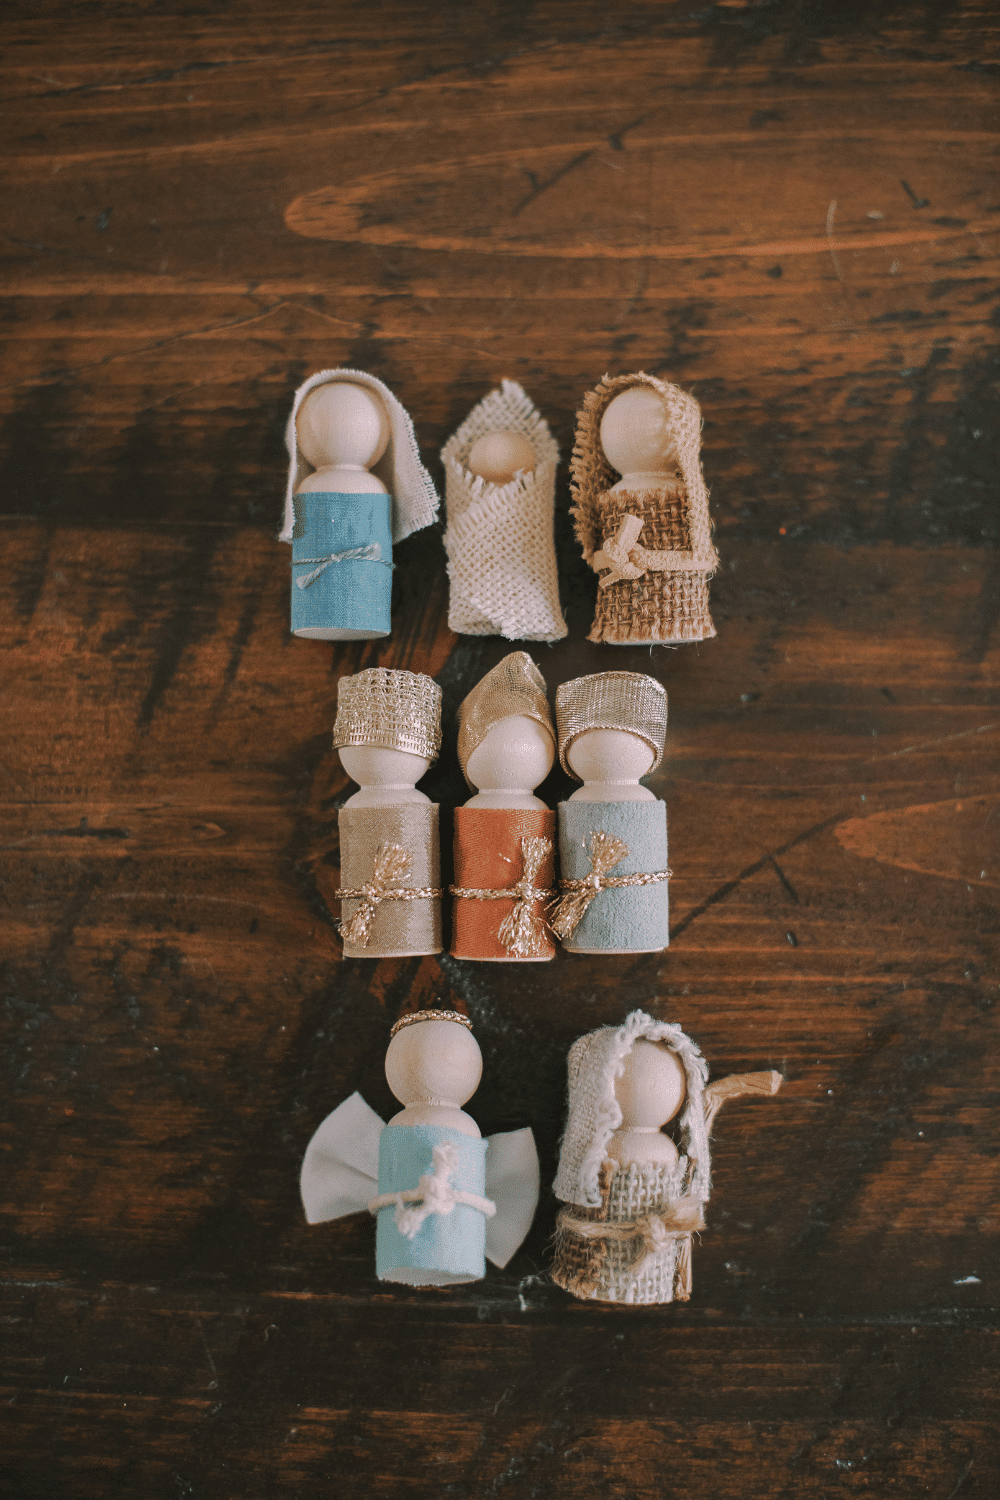 How to Make a Wooden Peg Doll Nativity Set